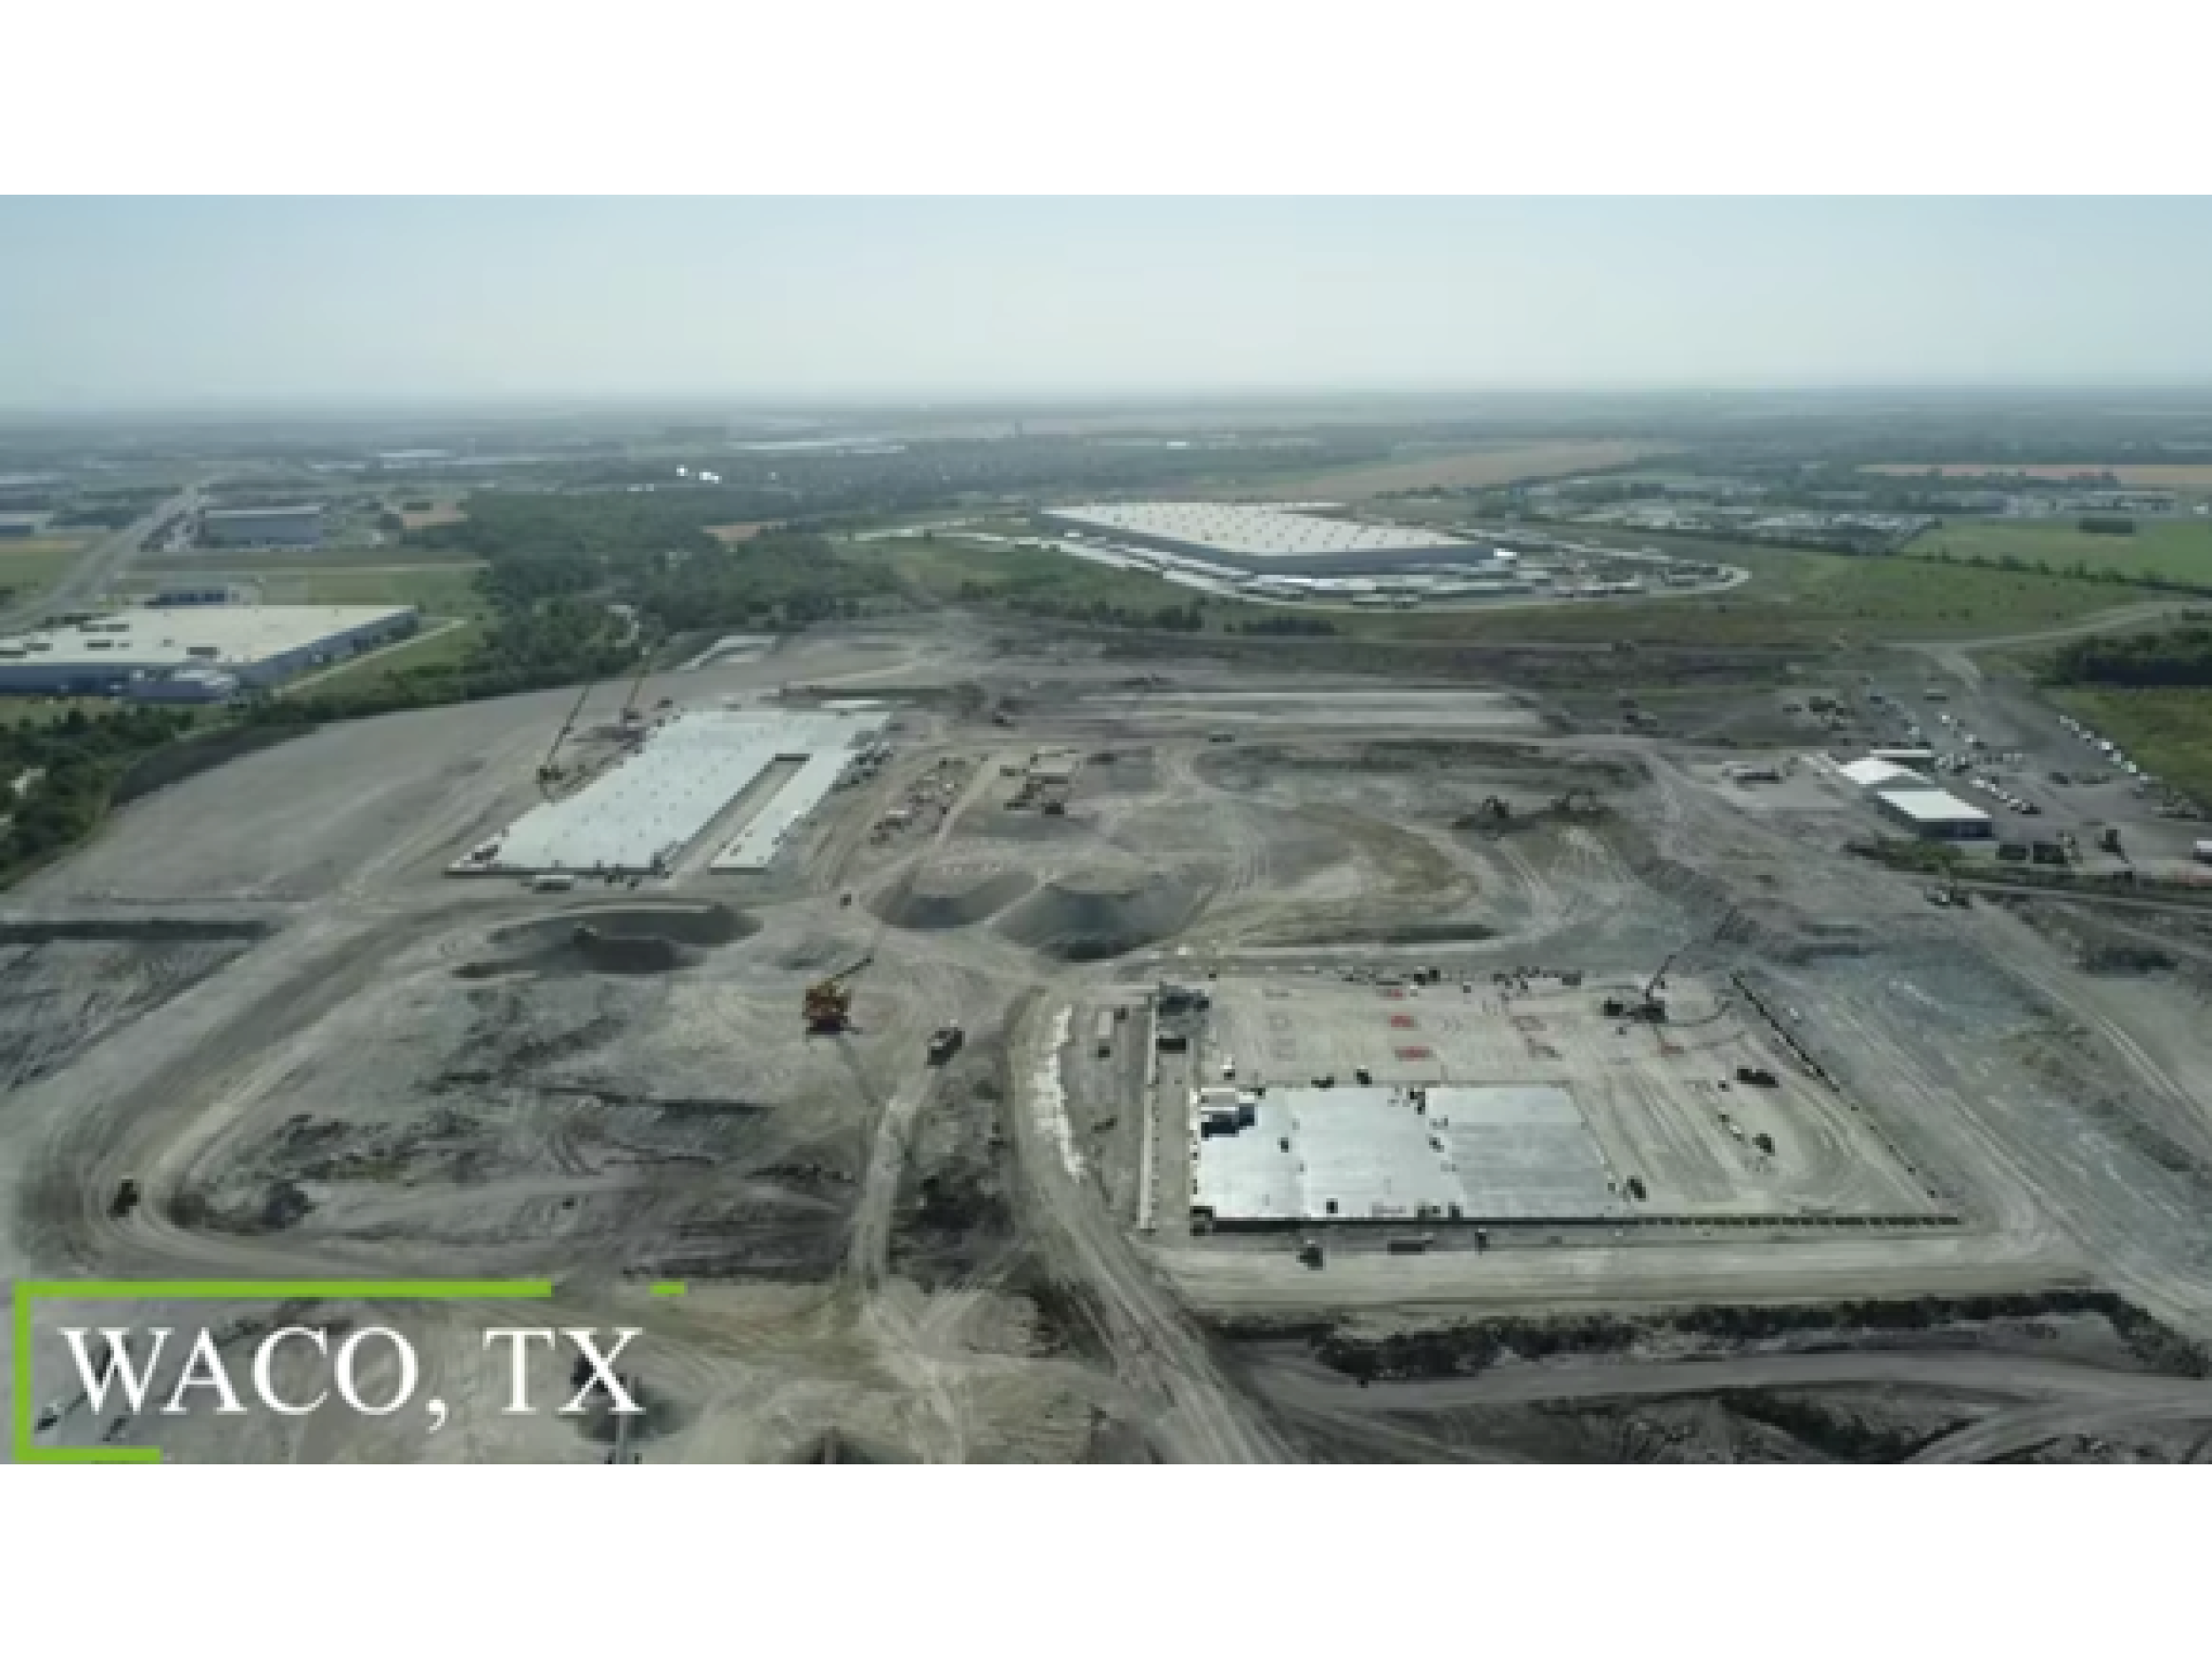 Graphic Packaging International announced its plans in early 2023 to build a facility in Waco, Texas dedicated to producing recycled paperboard, slated to open in 2026.